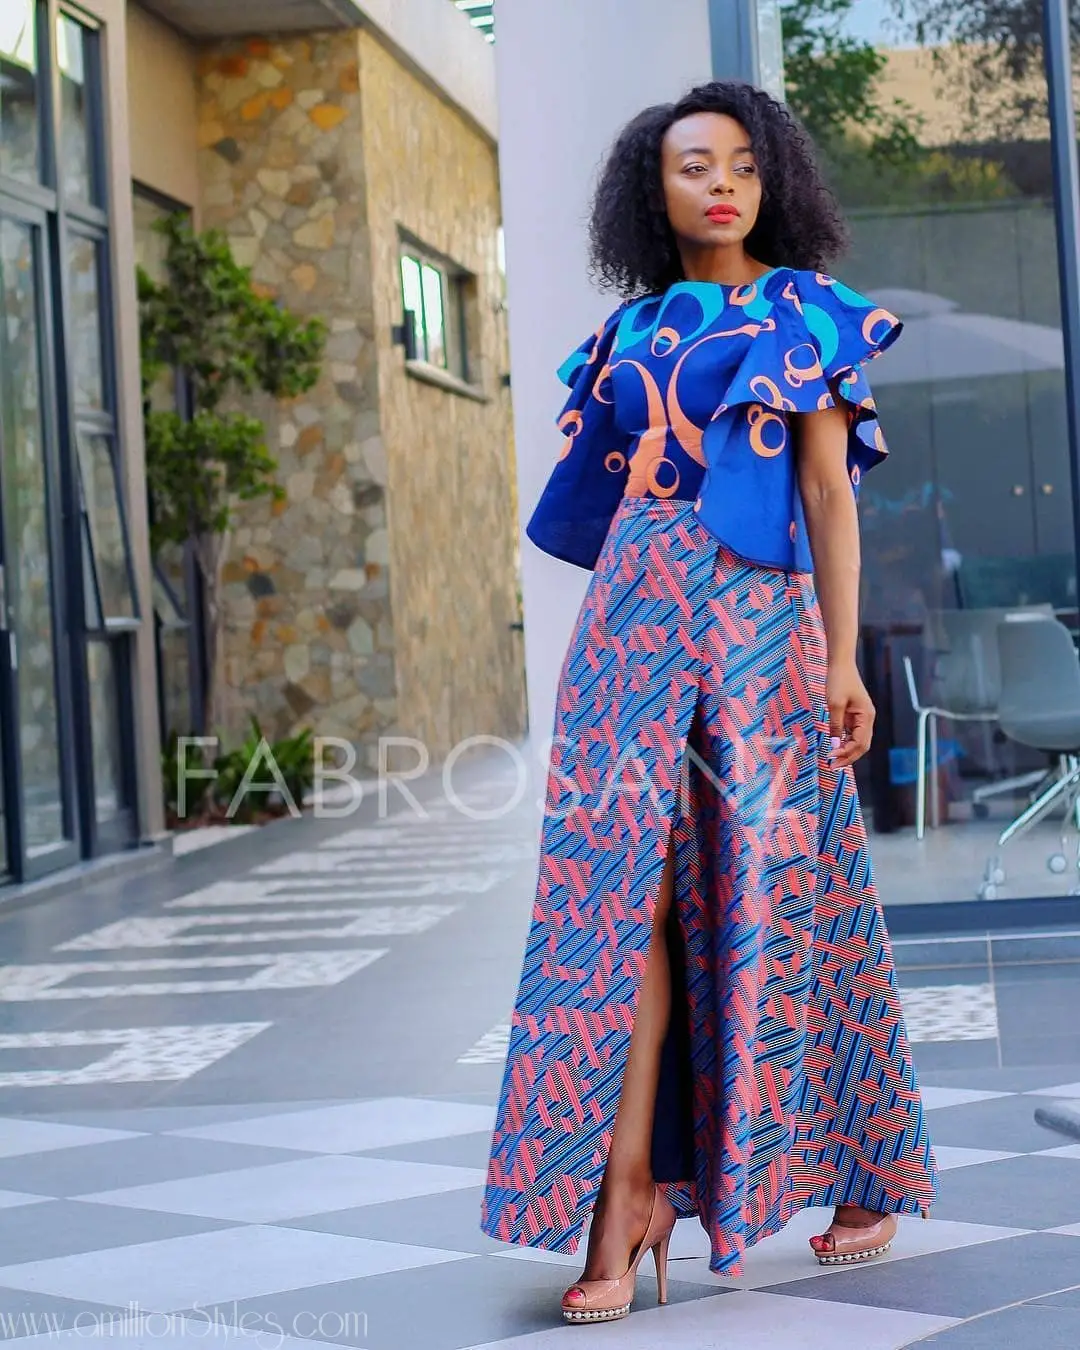 What Do You Think Of These Tuesday Latest Ankara Styles?